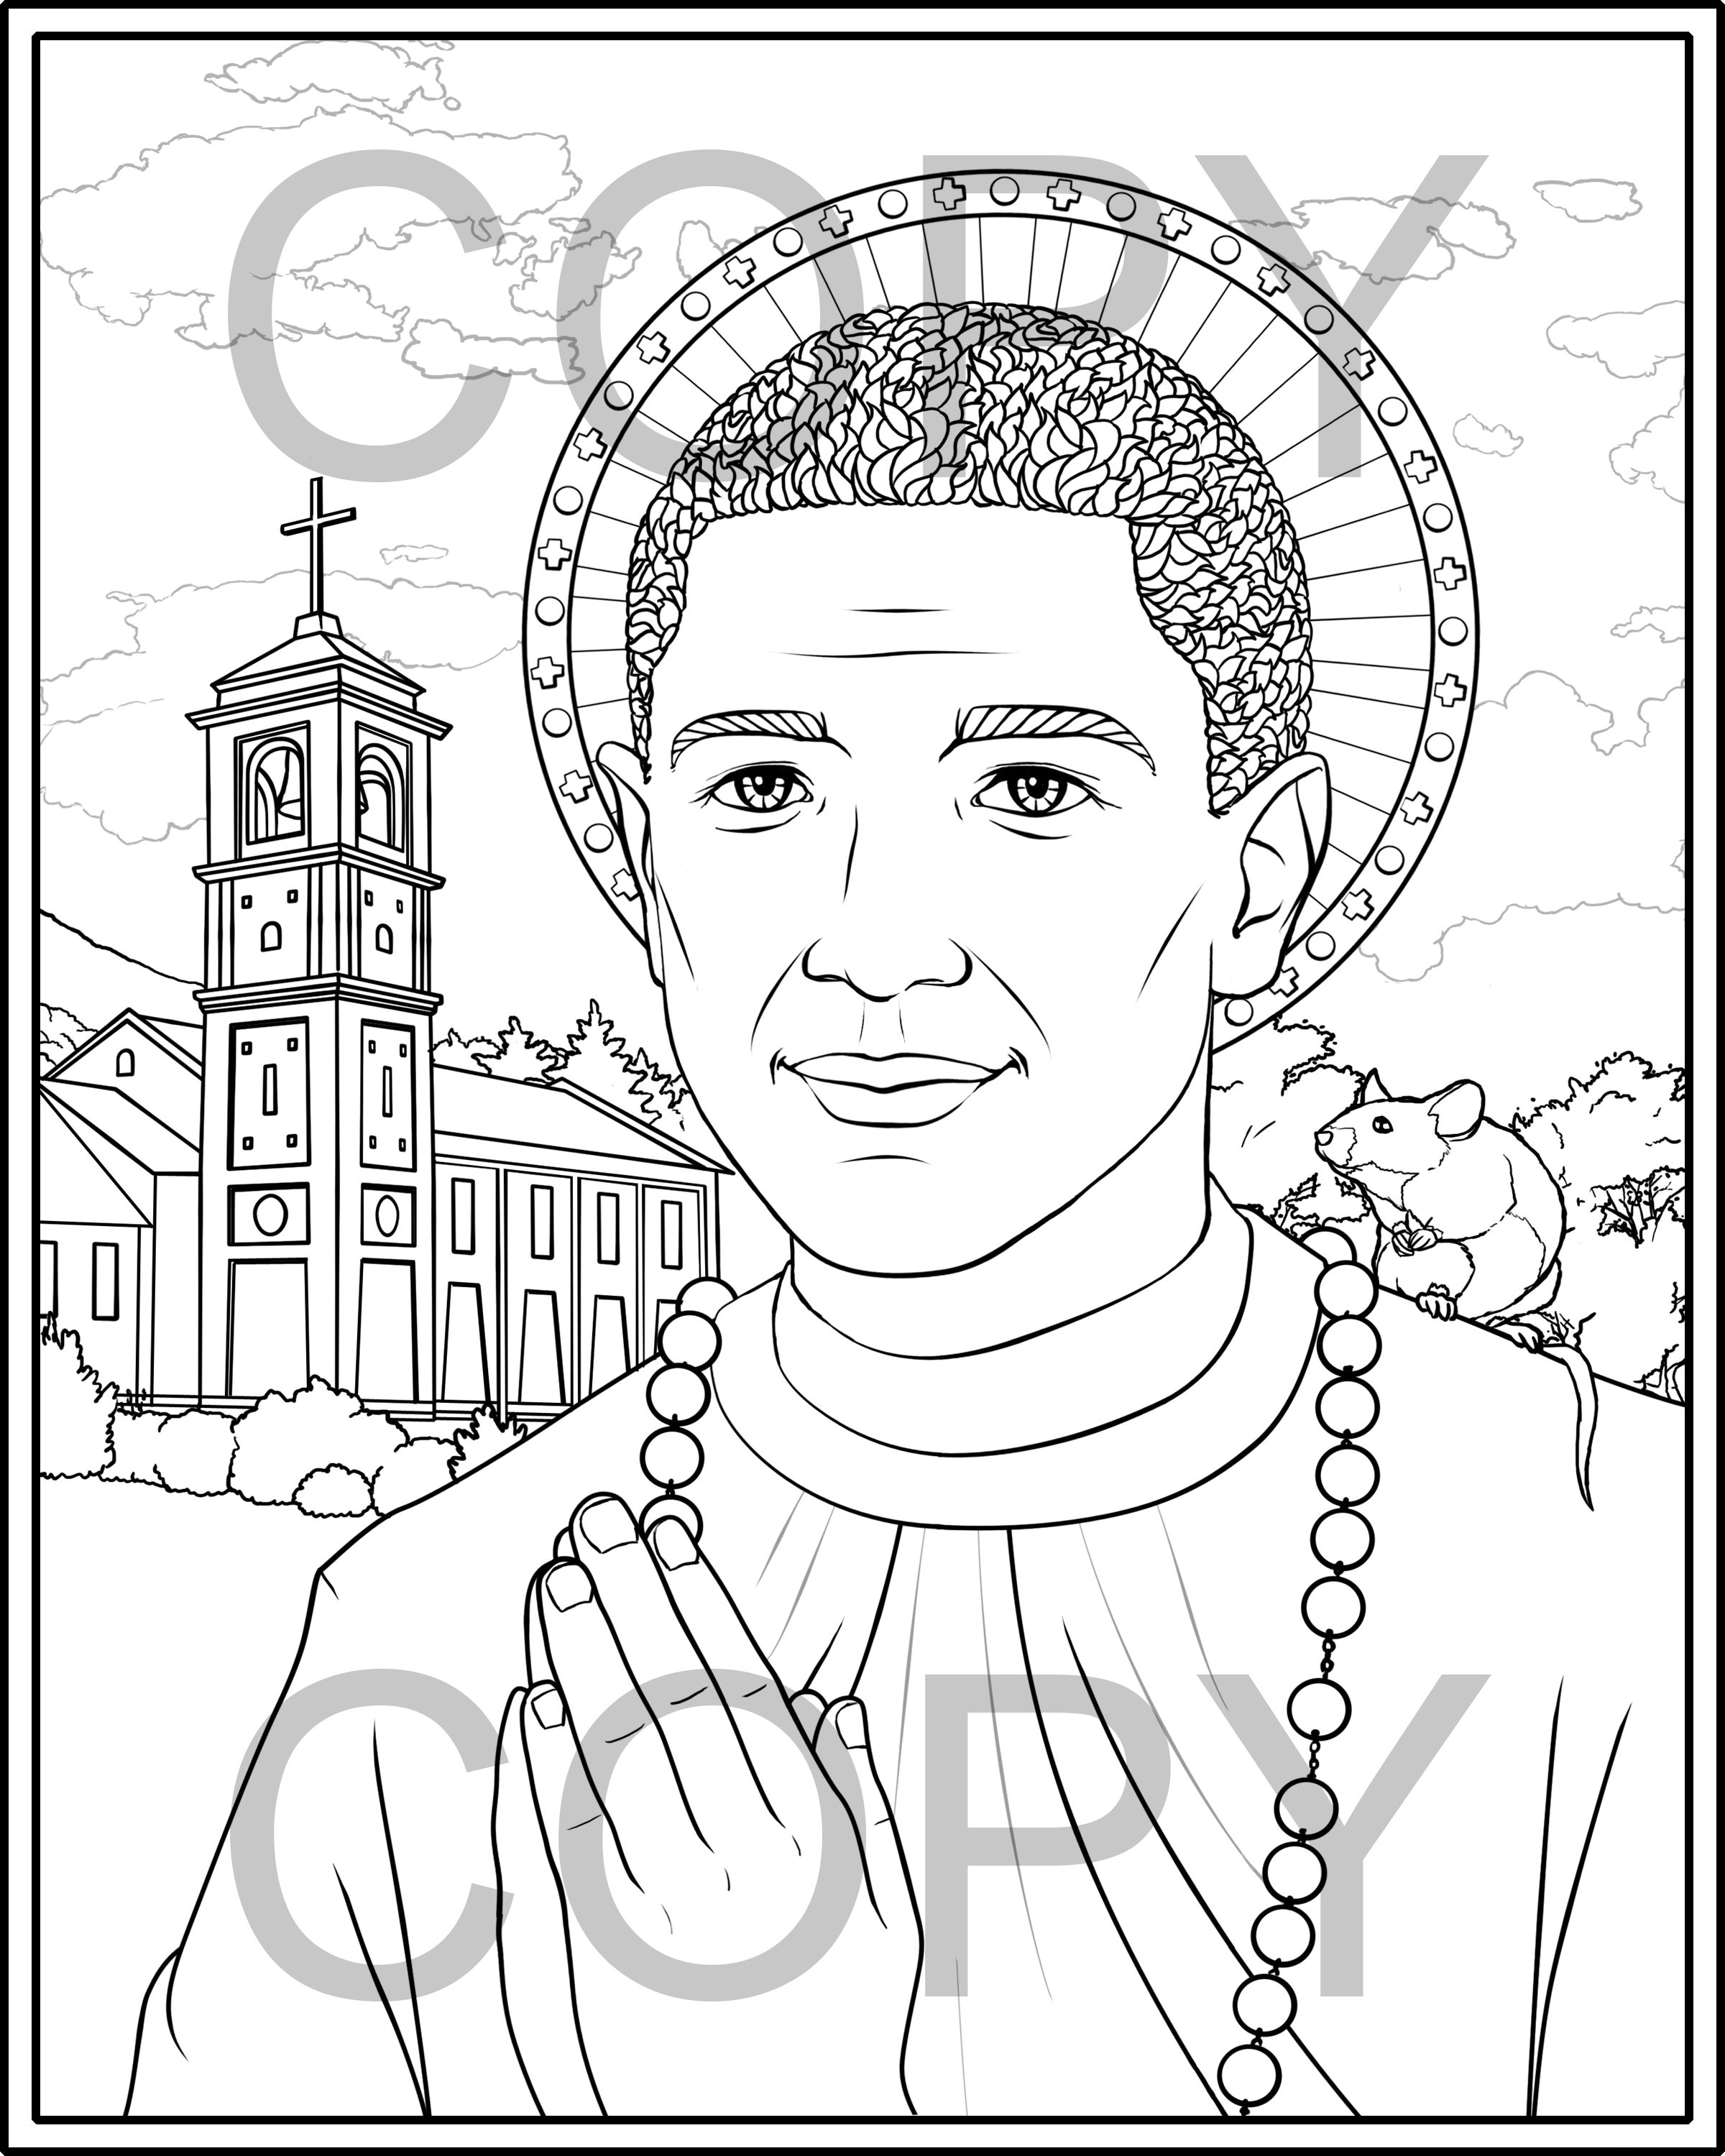 St martin coloring